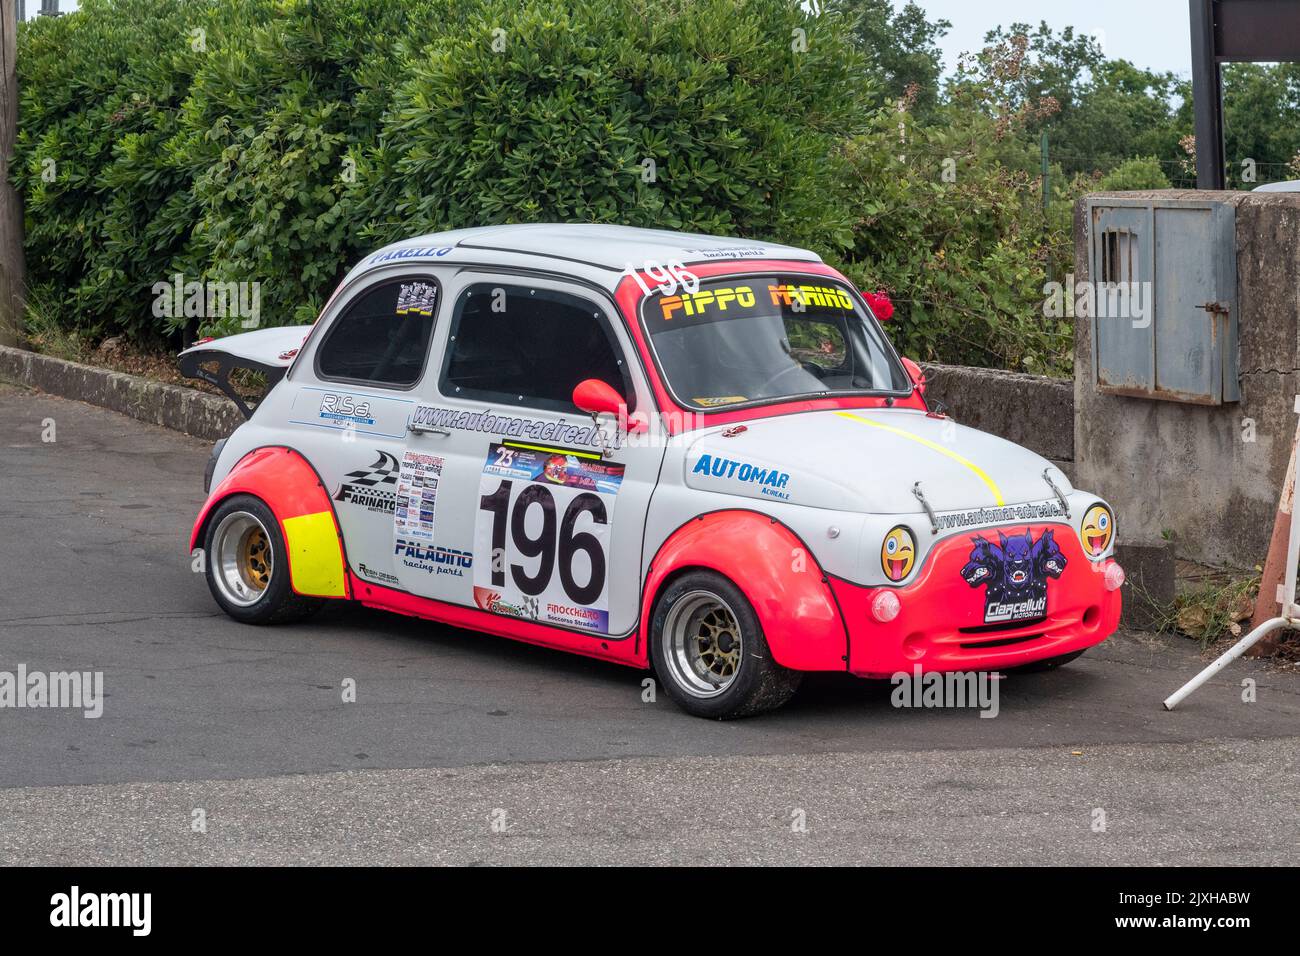 A vintage Fiat 500 minicar competing at the Giarre-Milo hill climb event on Mount Etna, Sicily Stock Photo